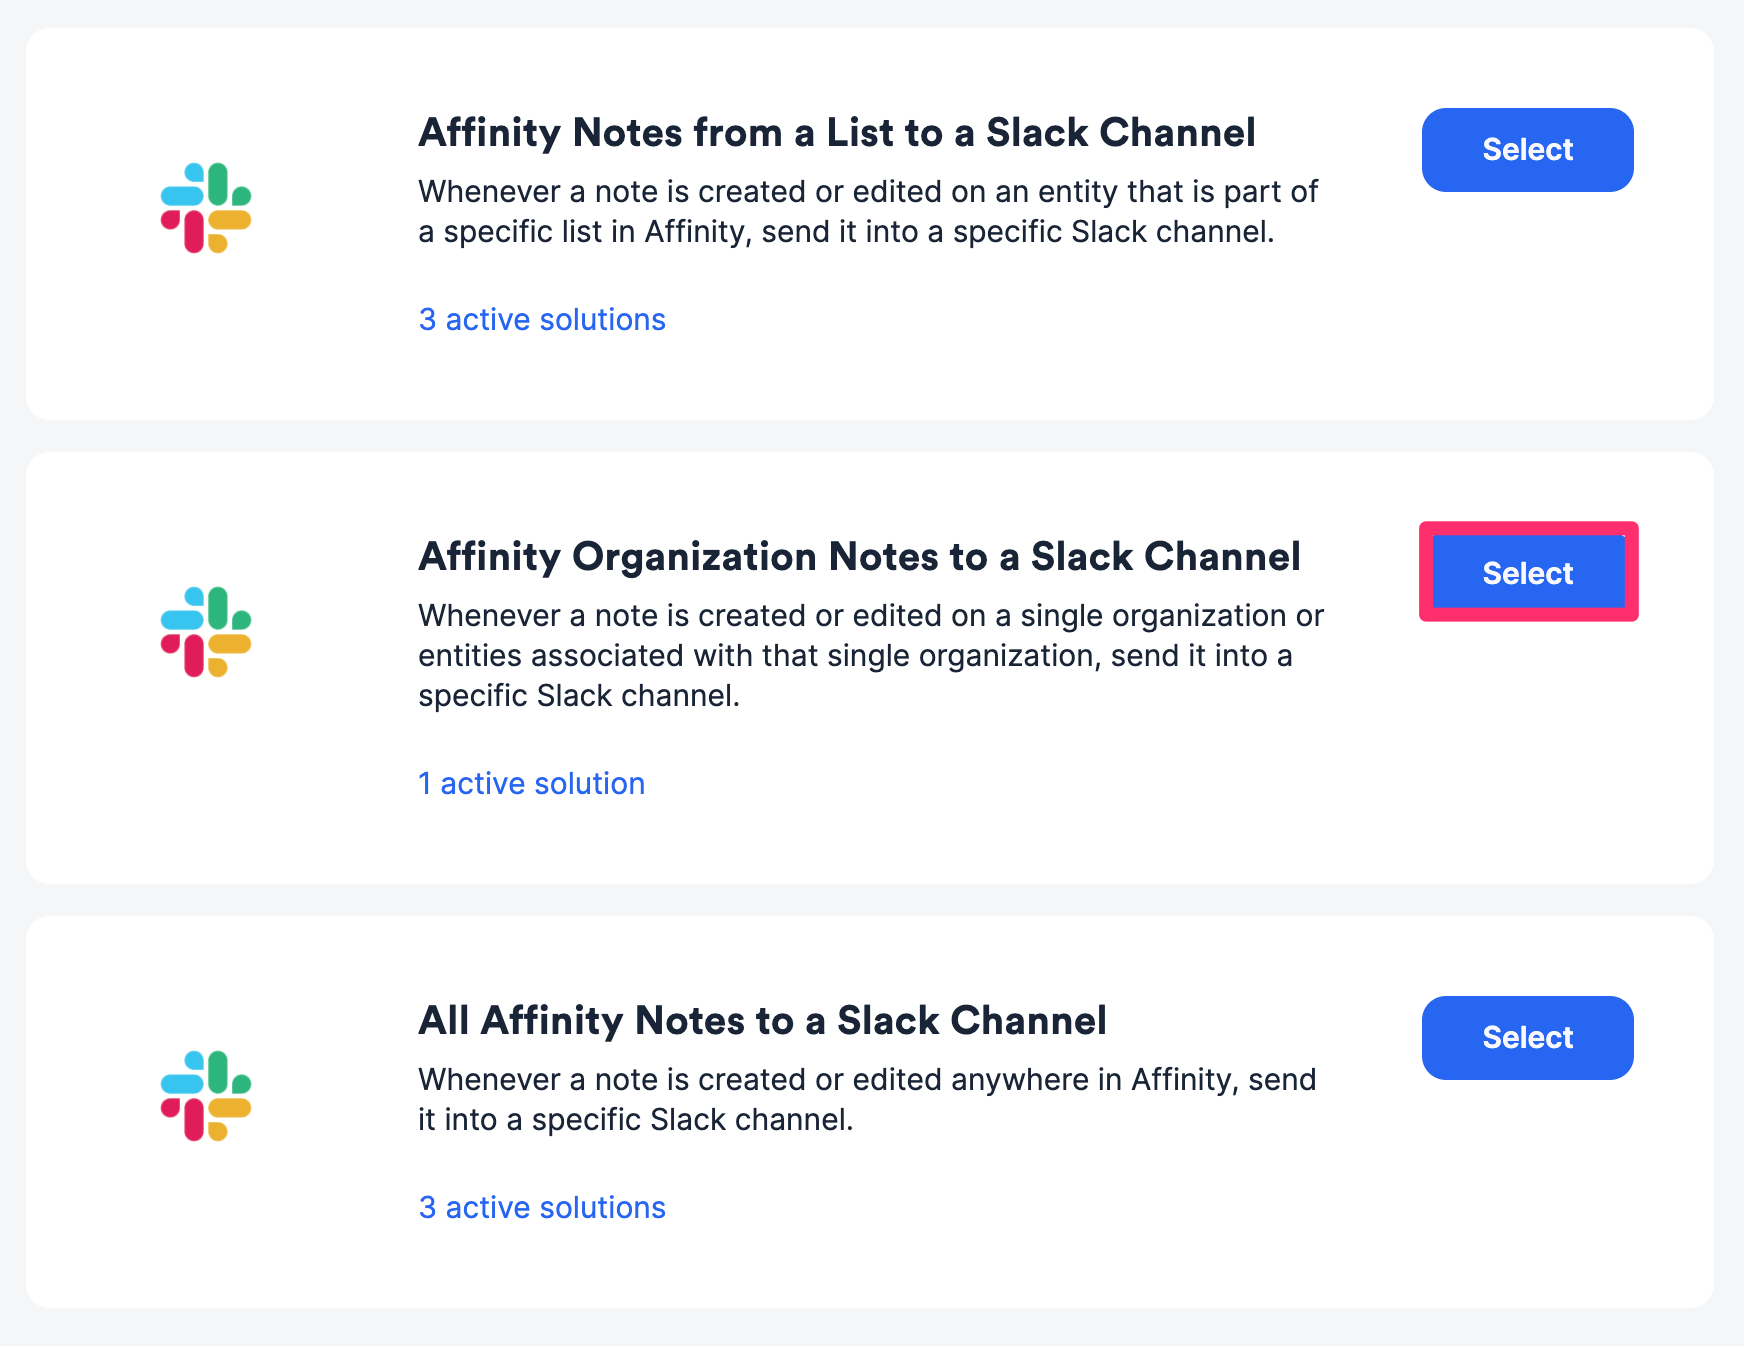 Affinity_Organization_Notes_to_a_Slack_Channel.png